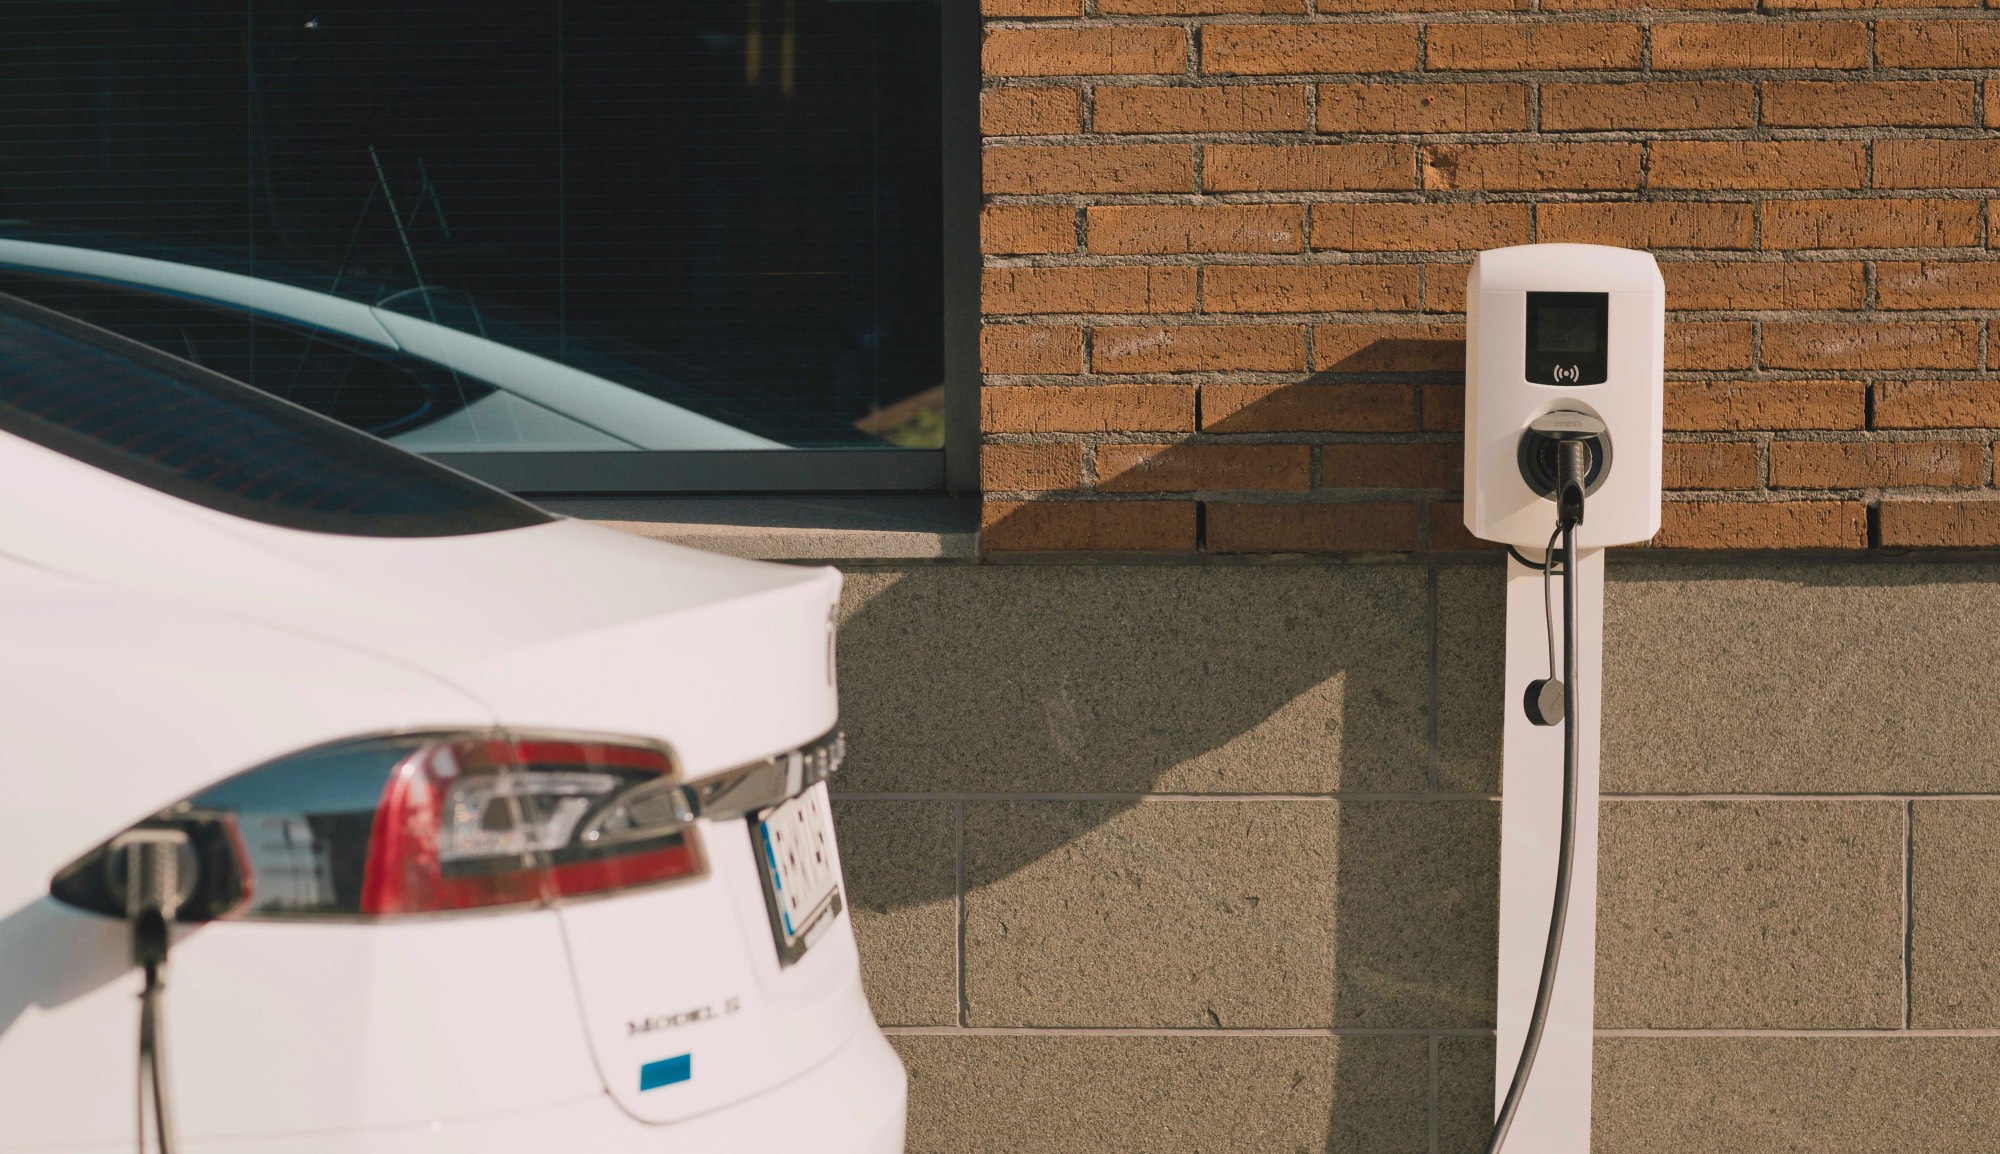 Wall Socket or a Charger: Choice of the Smart EV owner